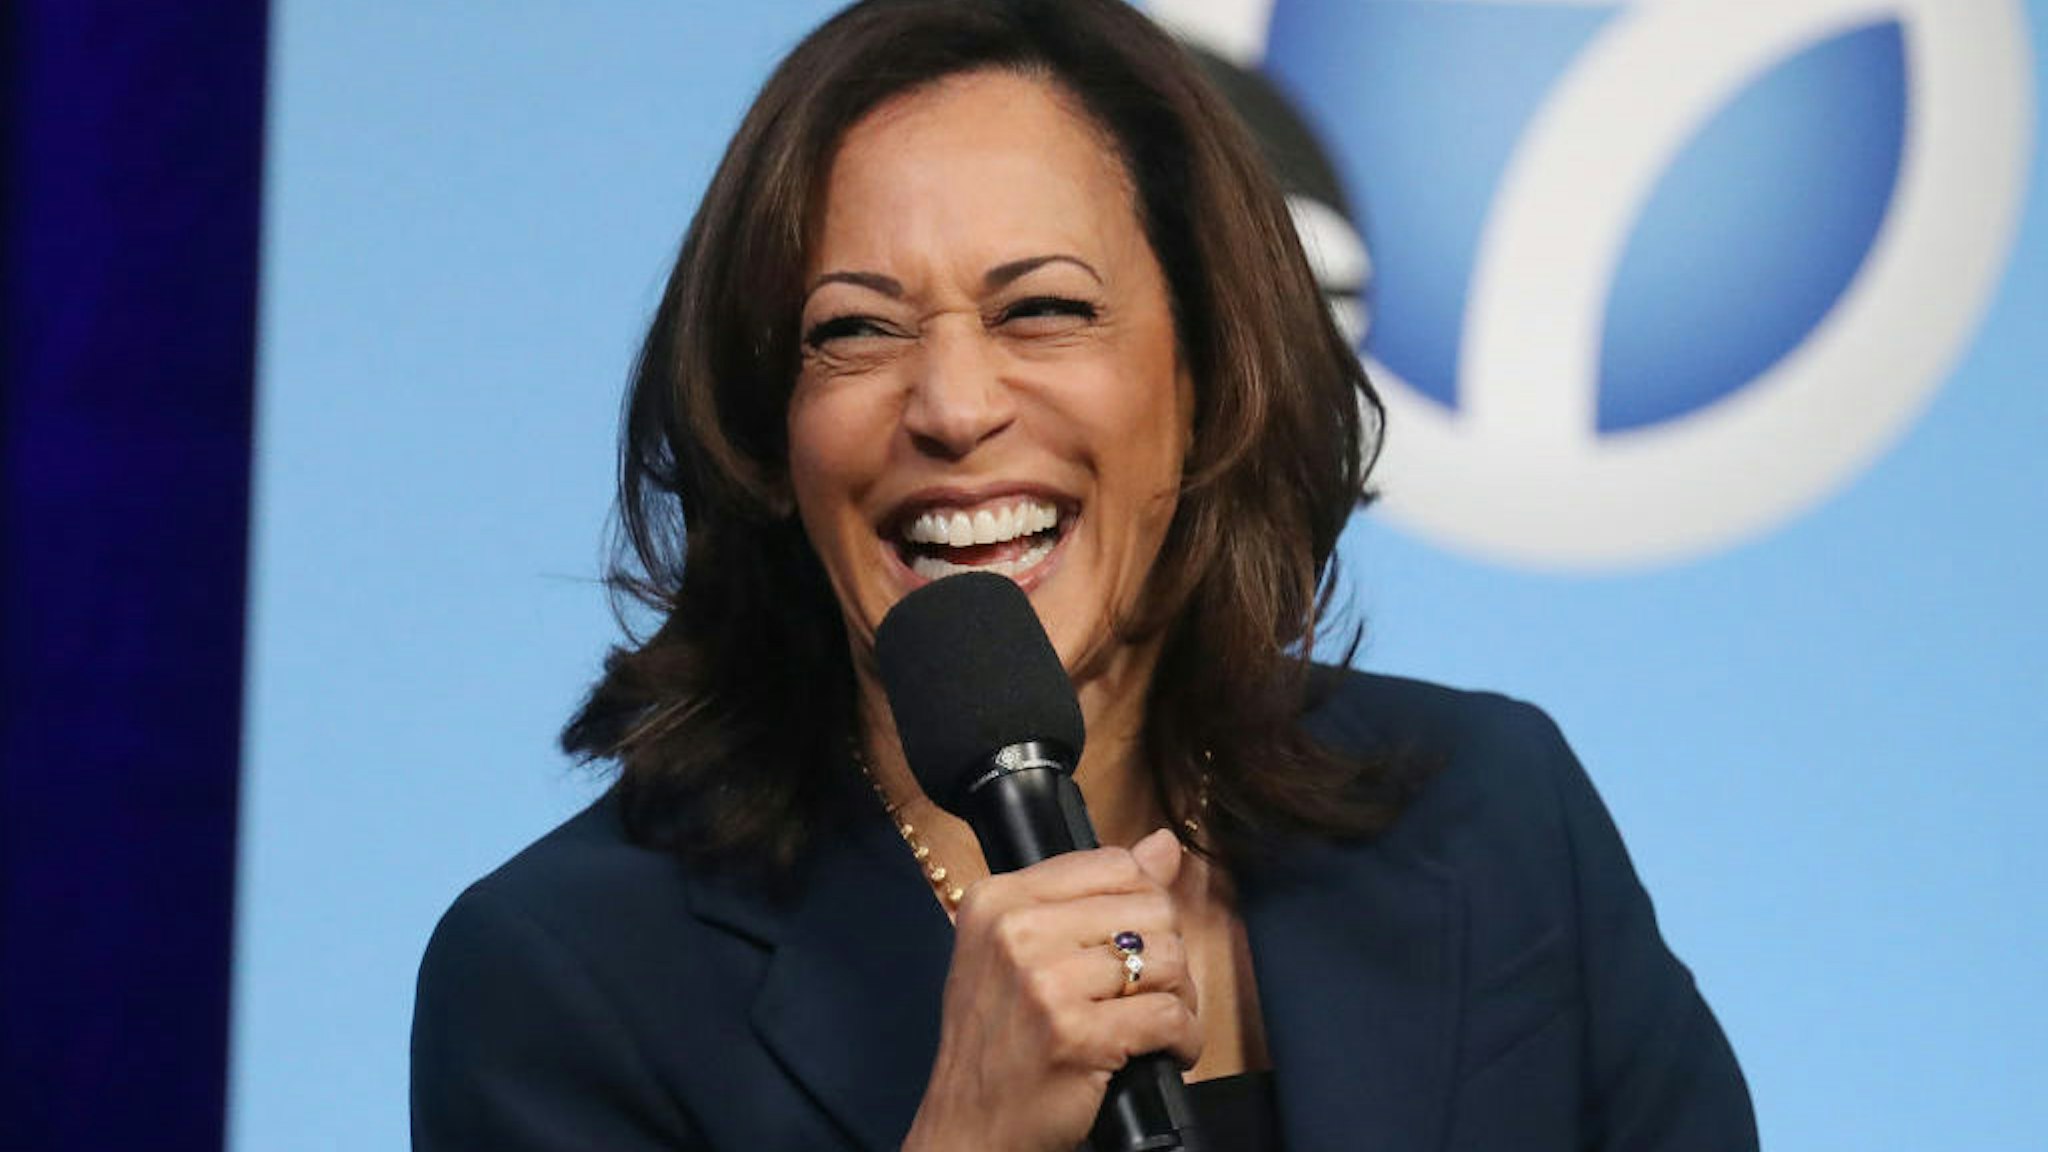 LOS ANGELES, CALIFORNIA - NOVEMBER 17: Democratic presidential candidate Sen. Kamala Harris (D-CA) laughs at a Democratic presidential forum on Latino issues at Cal State L.A. on November 17, 2019 in Los Angeles, California. The presidential primary in California will be held on March 3, 2020. (Photo by Mario Tama/Getty Images)